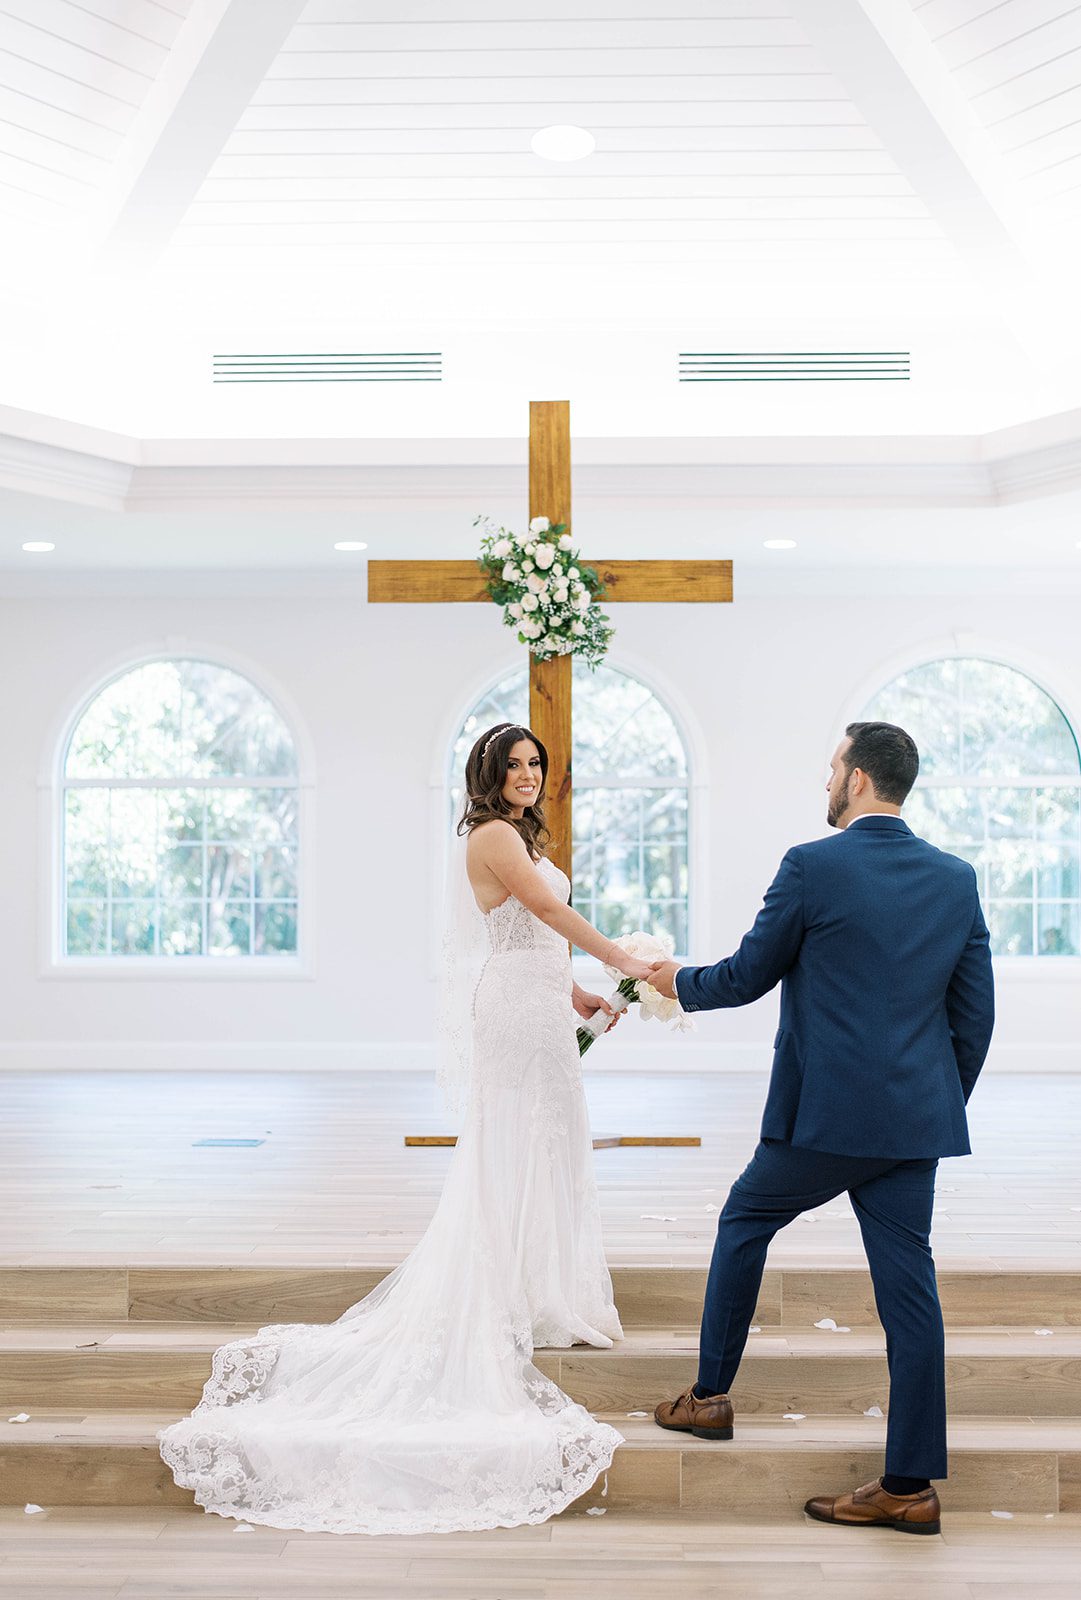 Harborside Chapel wedding in Tampa Florida with bride in a lace wedding dress holding hands with her groom as she walks up the stairs on the chapel's stage and smiles at her groom